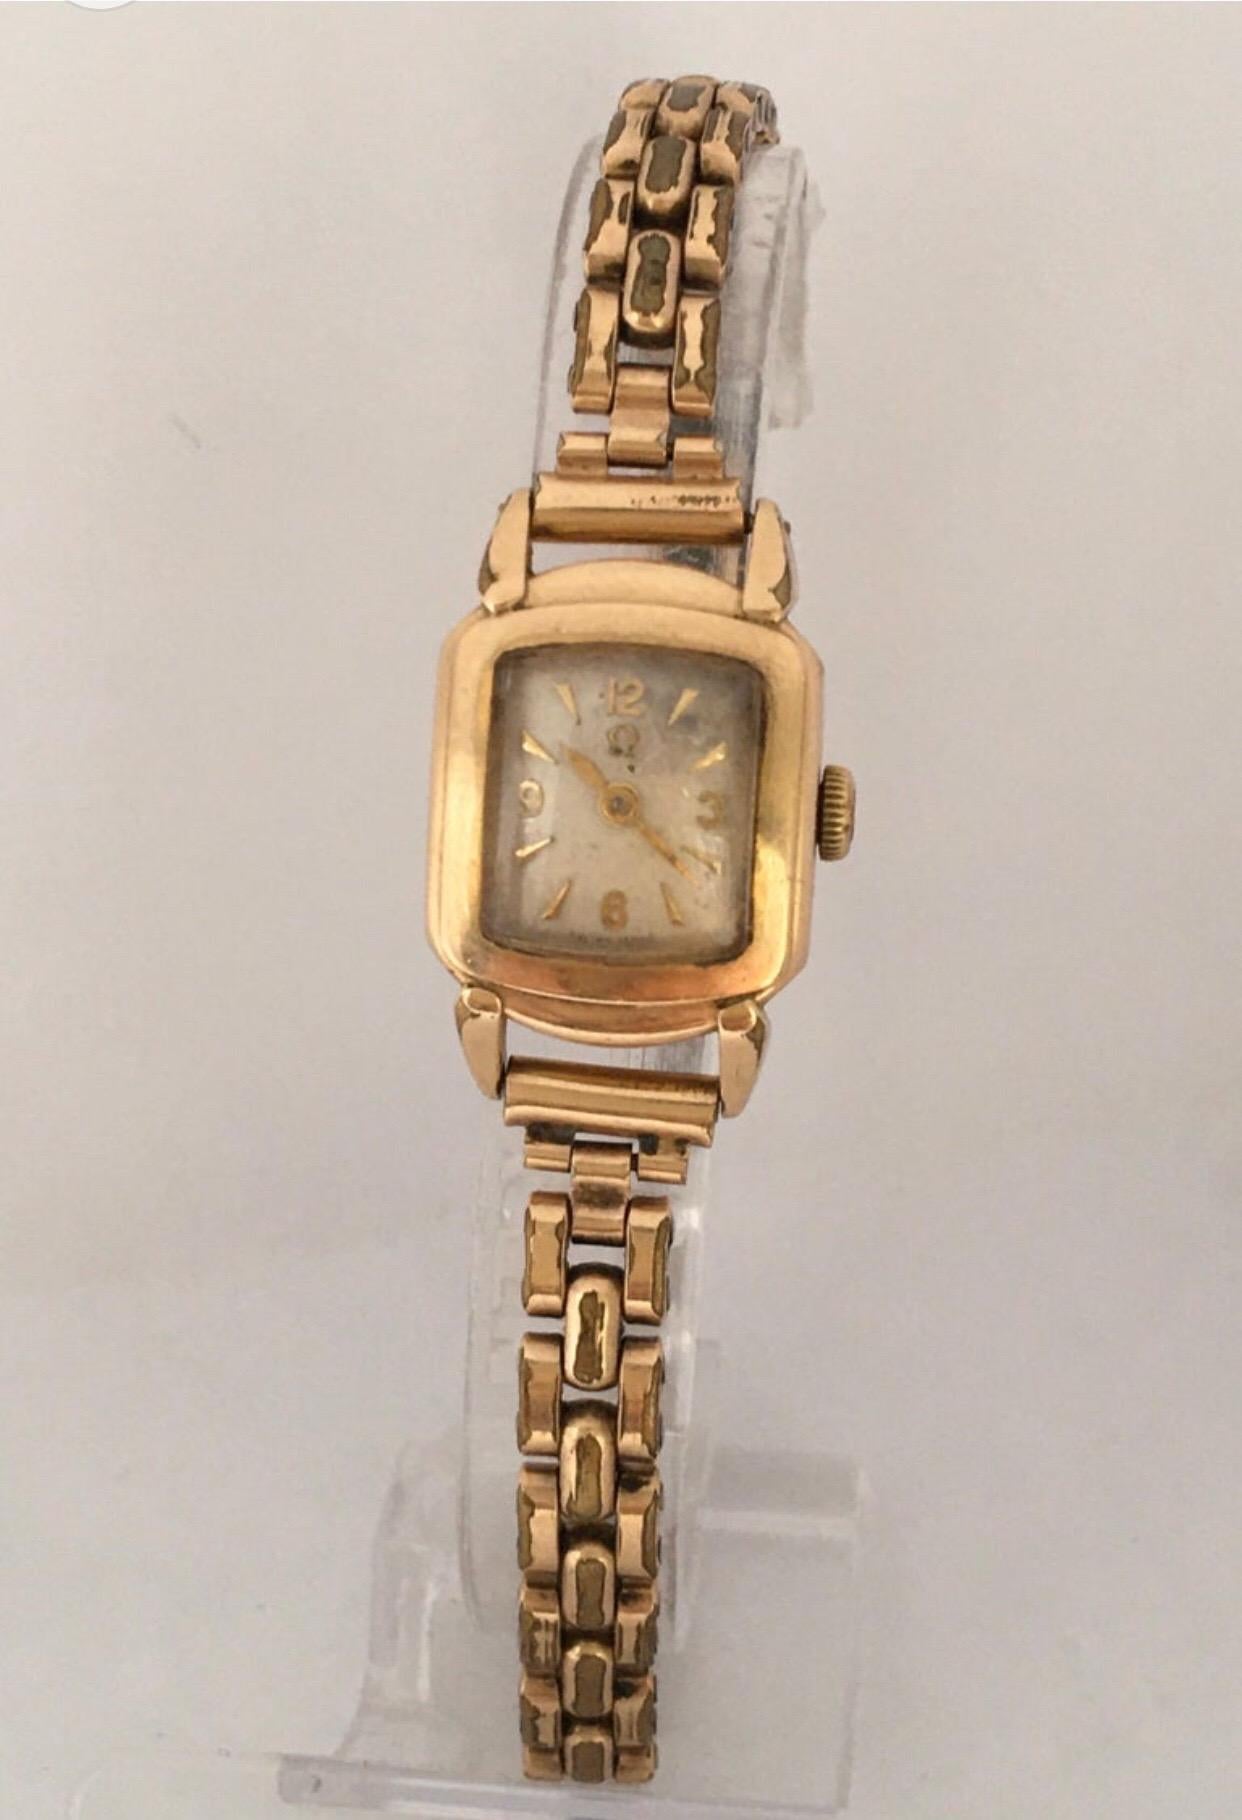 Ladies Omega Vintage Gold-Plated Mechanical Watch For Sale 10